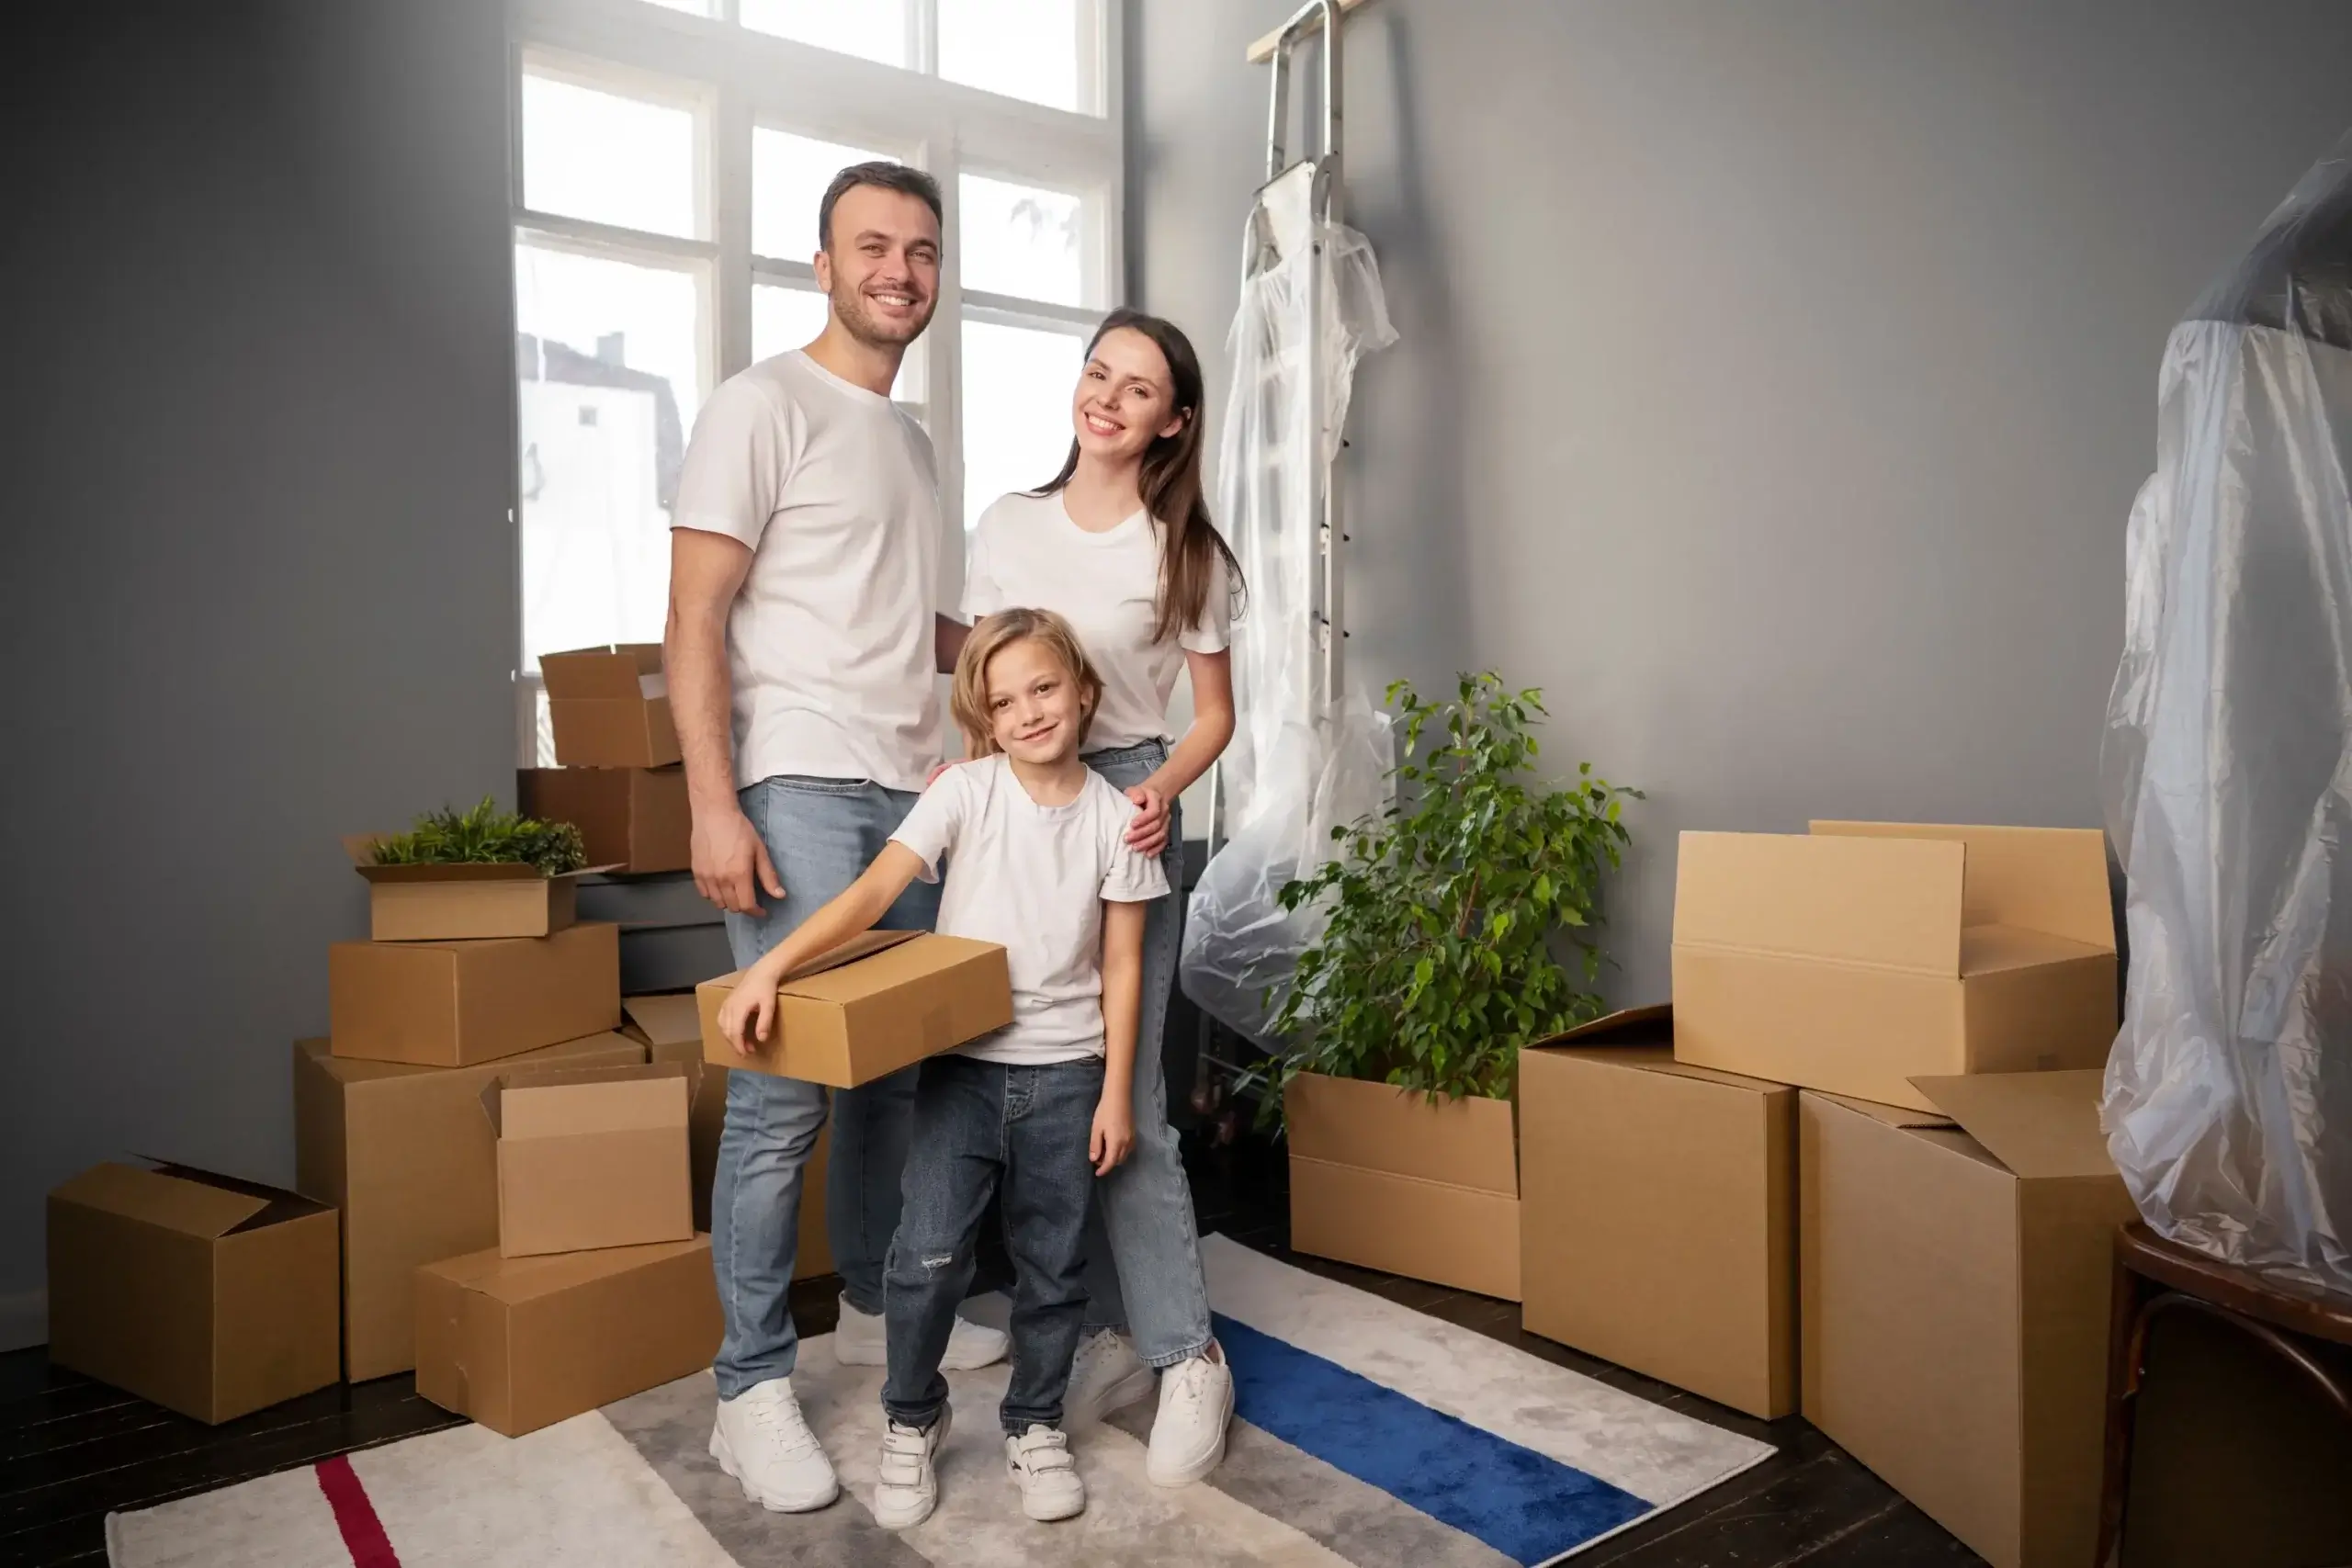 Hire Local Movers in Hoboken and Unlock These 7 Key Benefits